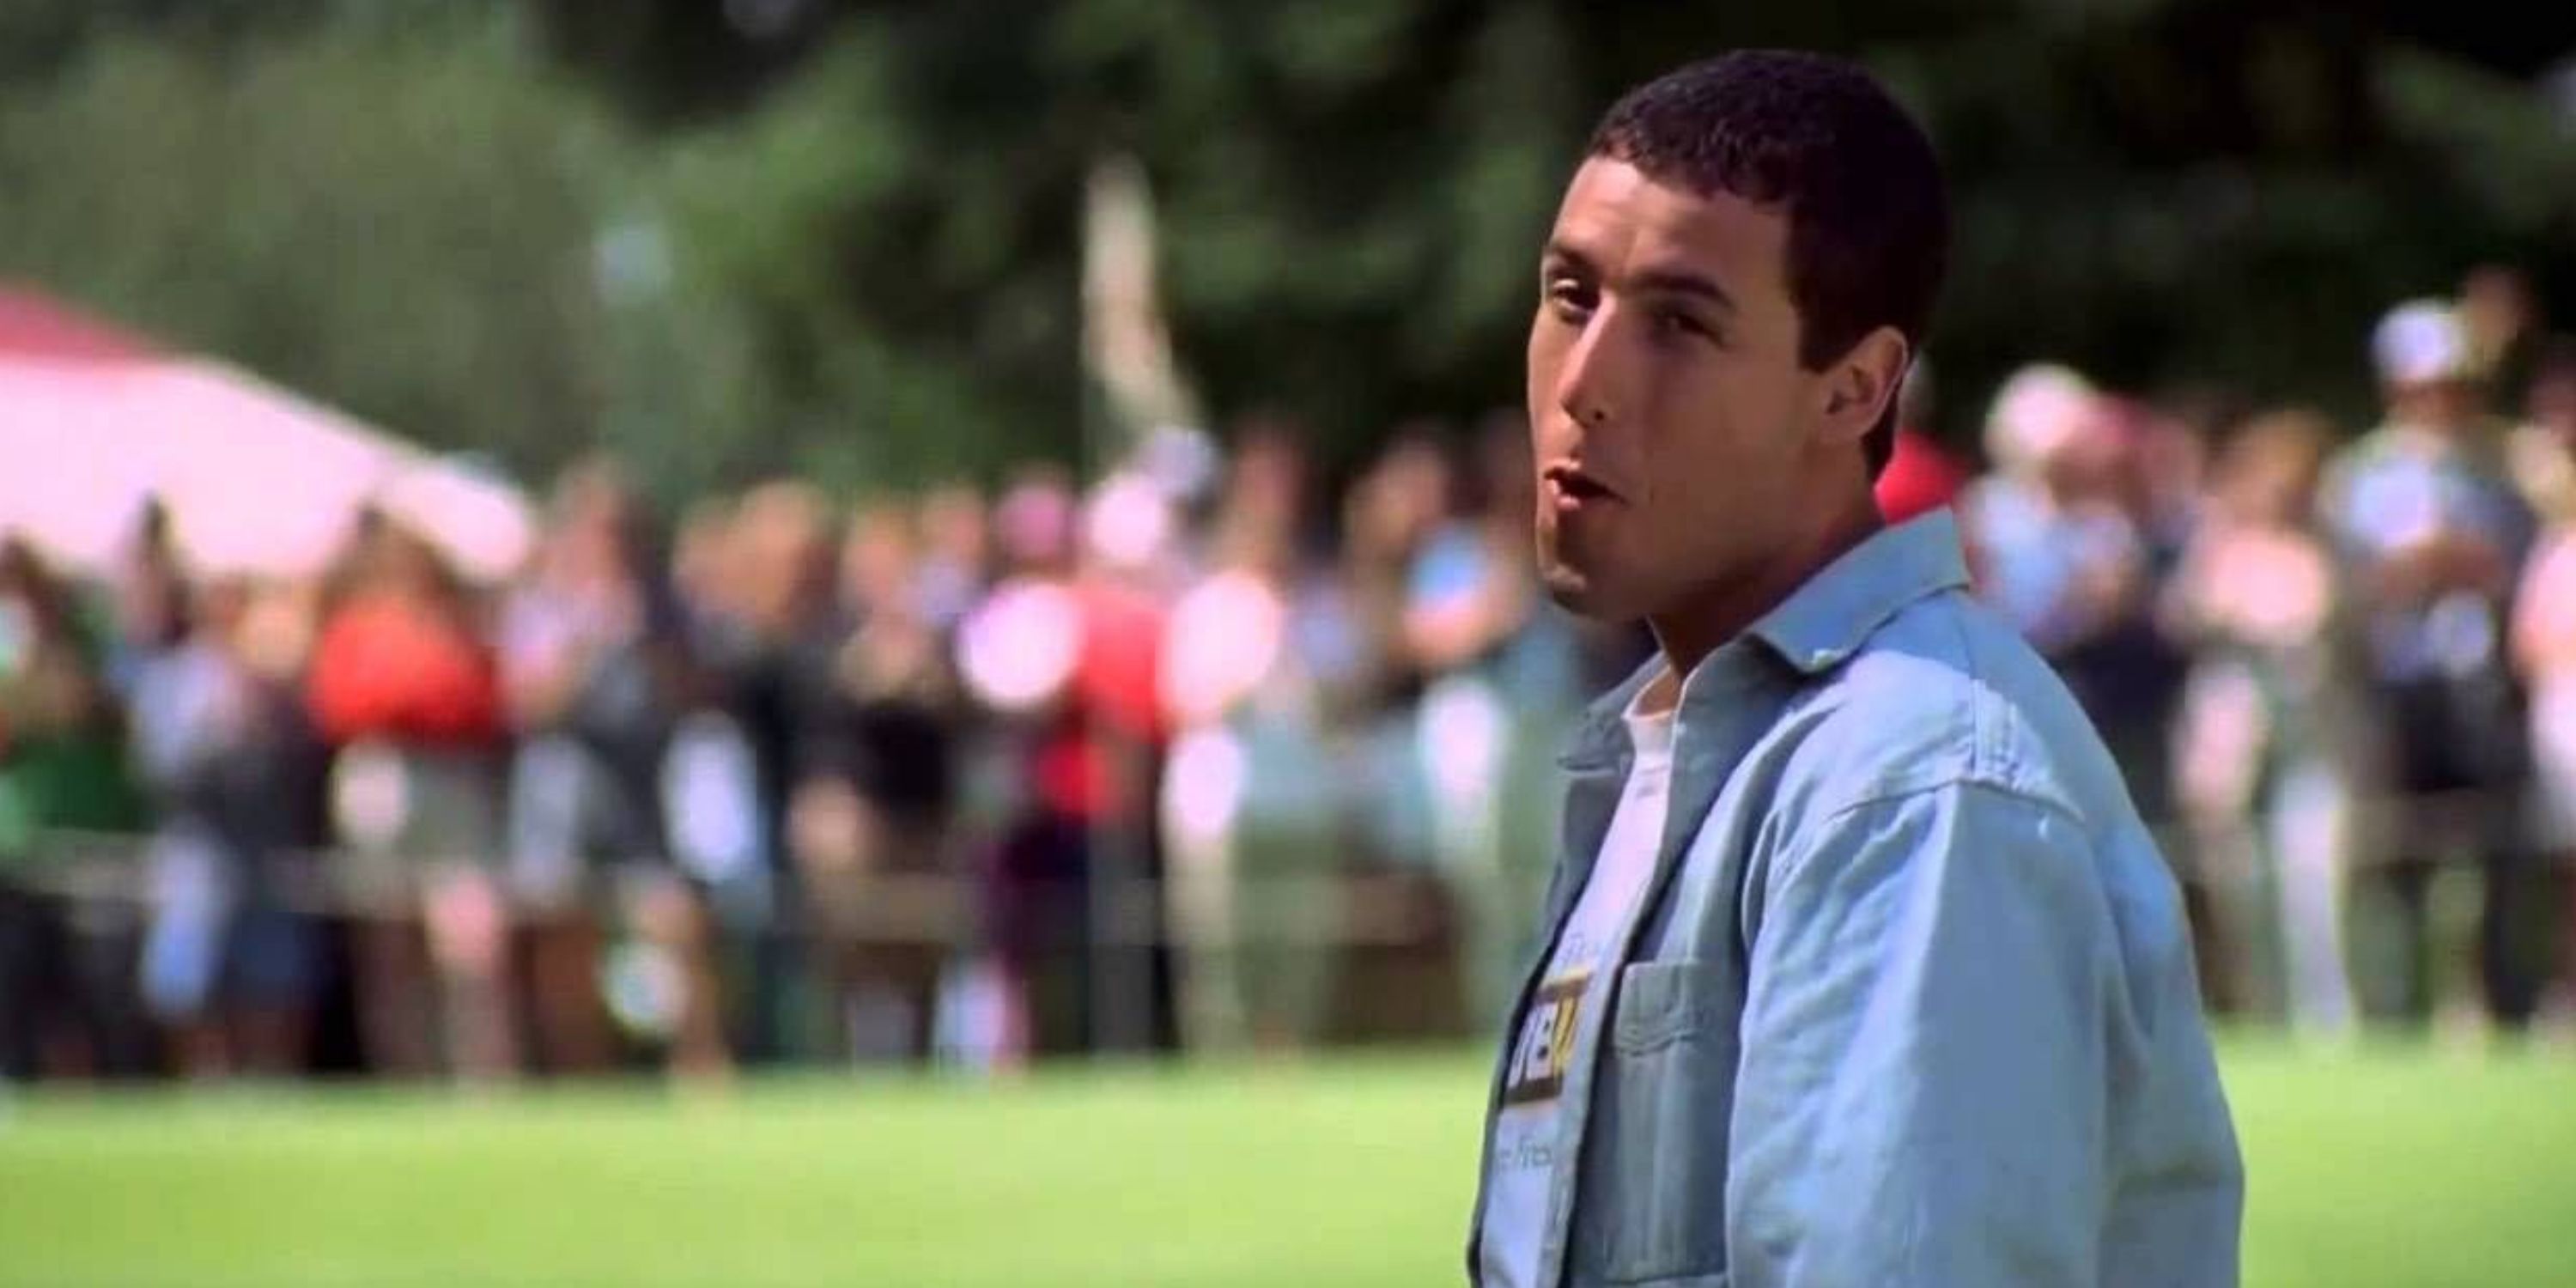 Happy mocking Shooter on the golf course in Happy Gilmore